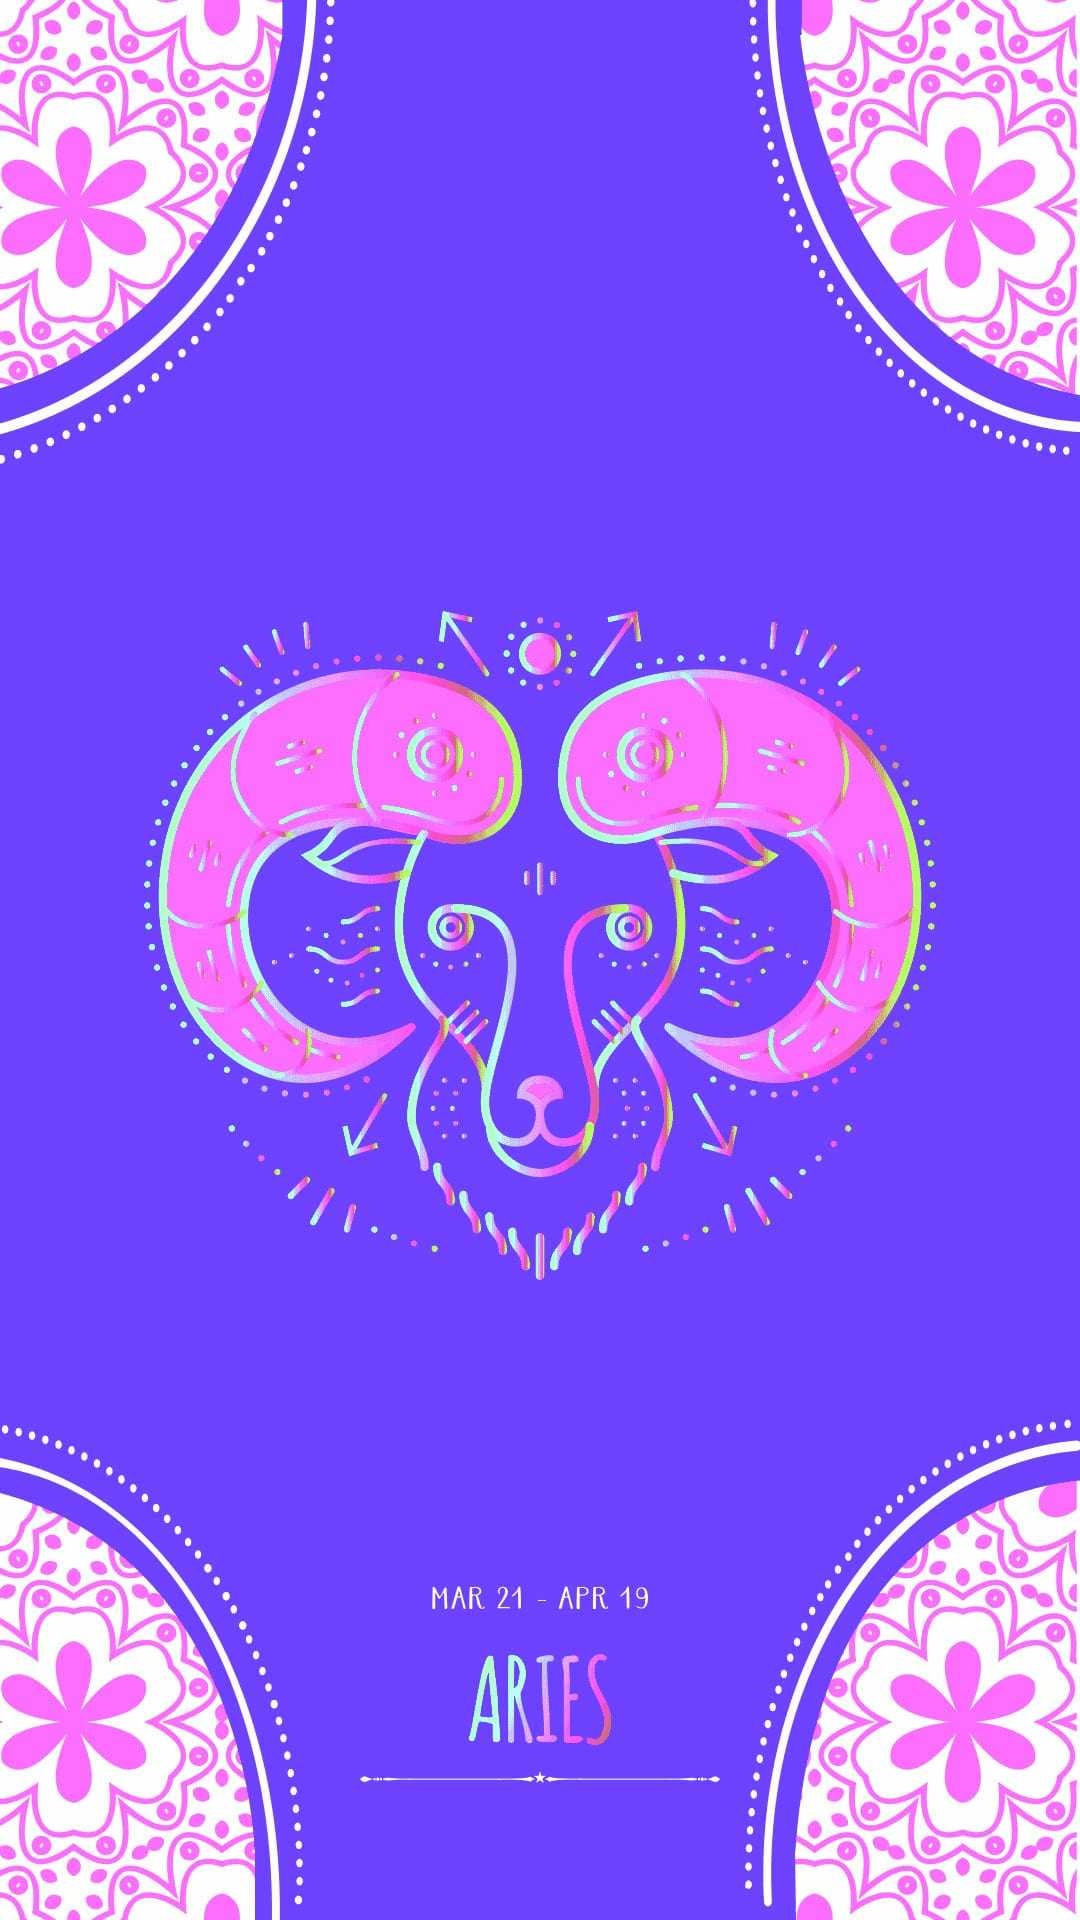 HD wallpaper, Illustration, Zodiac Symbol, 1080X1920 Full Hd Phone, Aries Astrological Sign, Iphone Full Hd Aries Zodiac Sign Background Image, Flat Style